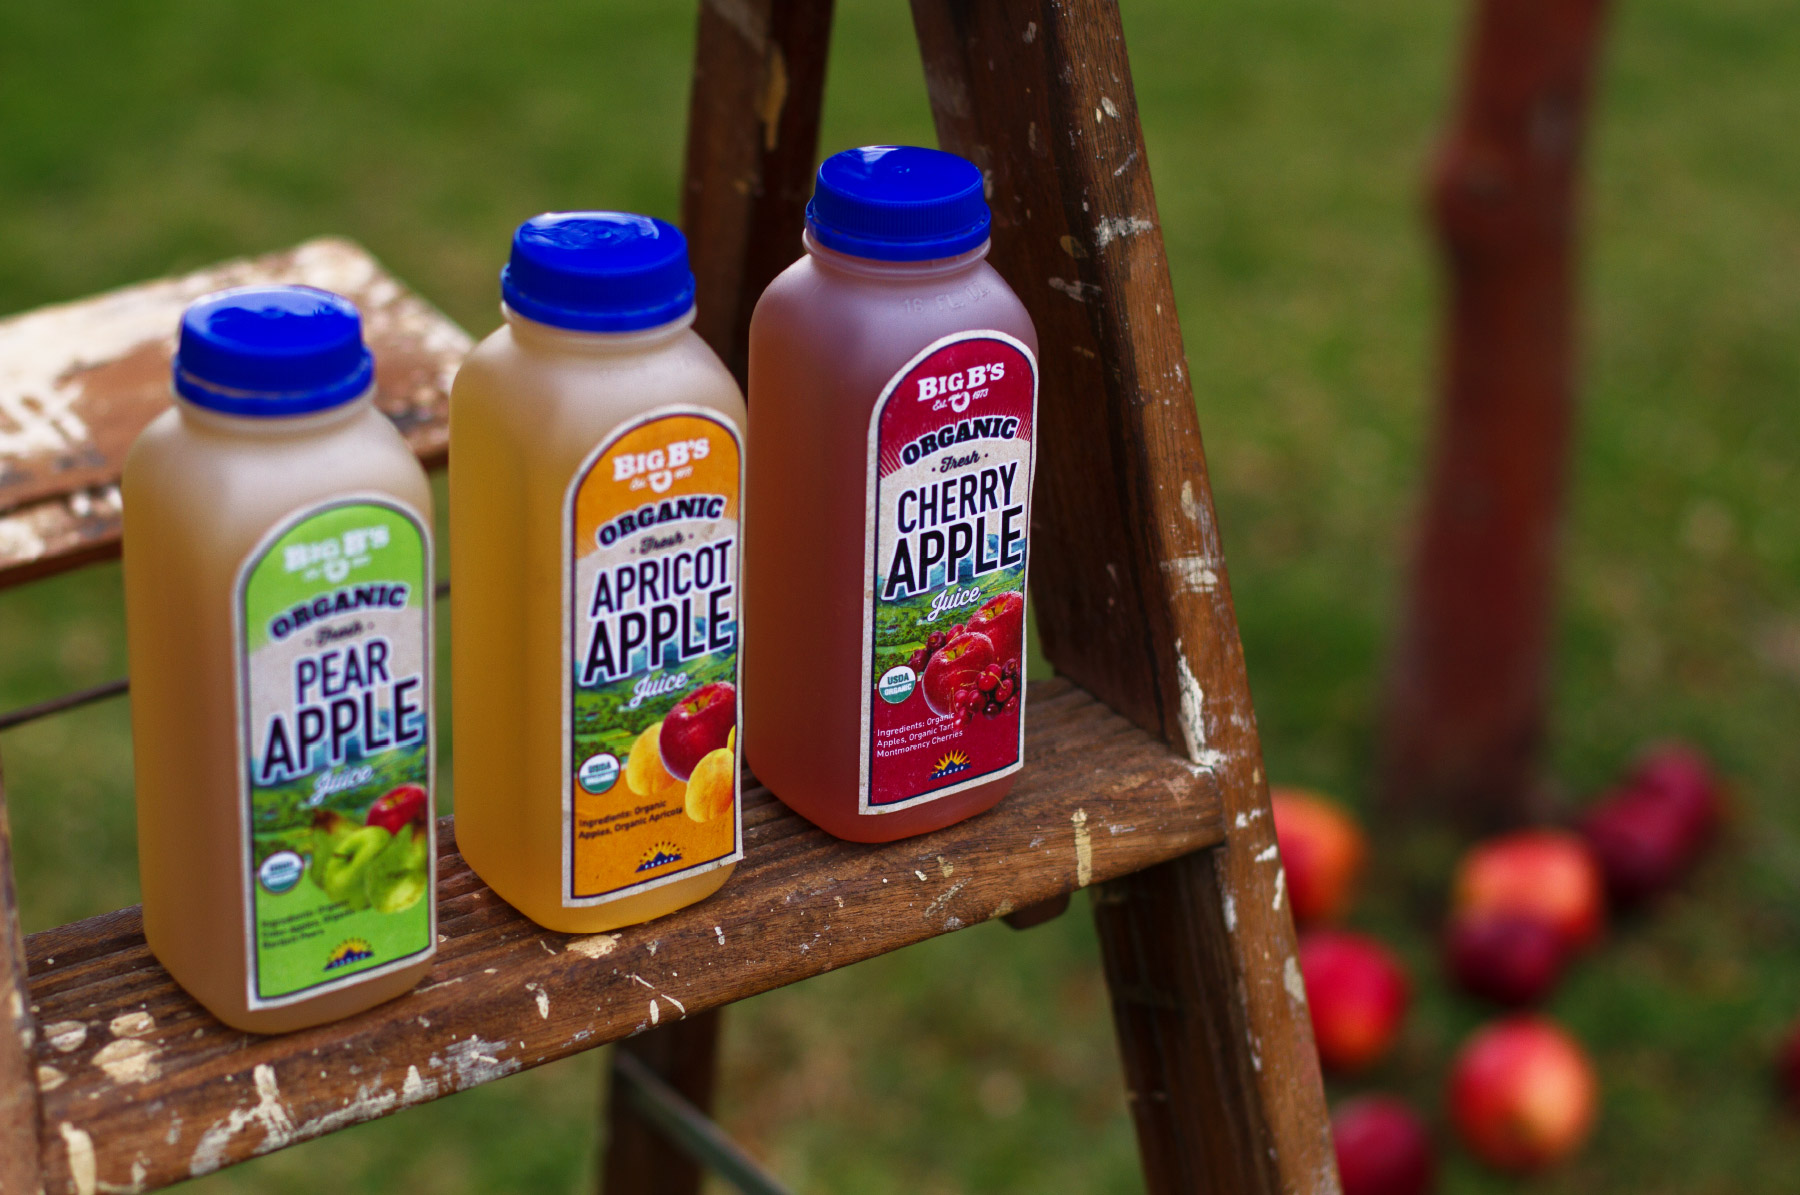 Pear, apricot, and cherry apple juice product photography